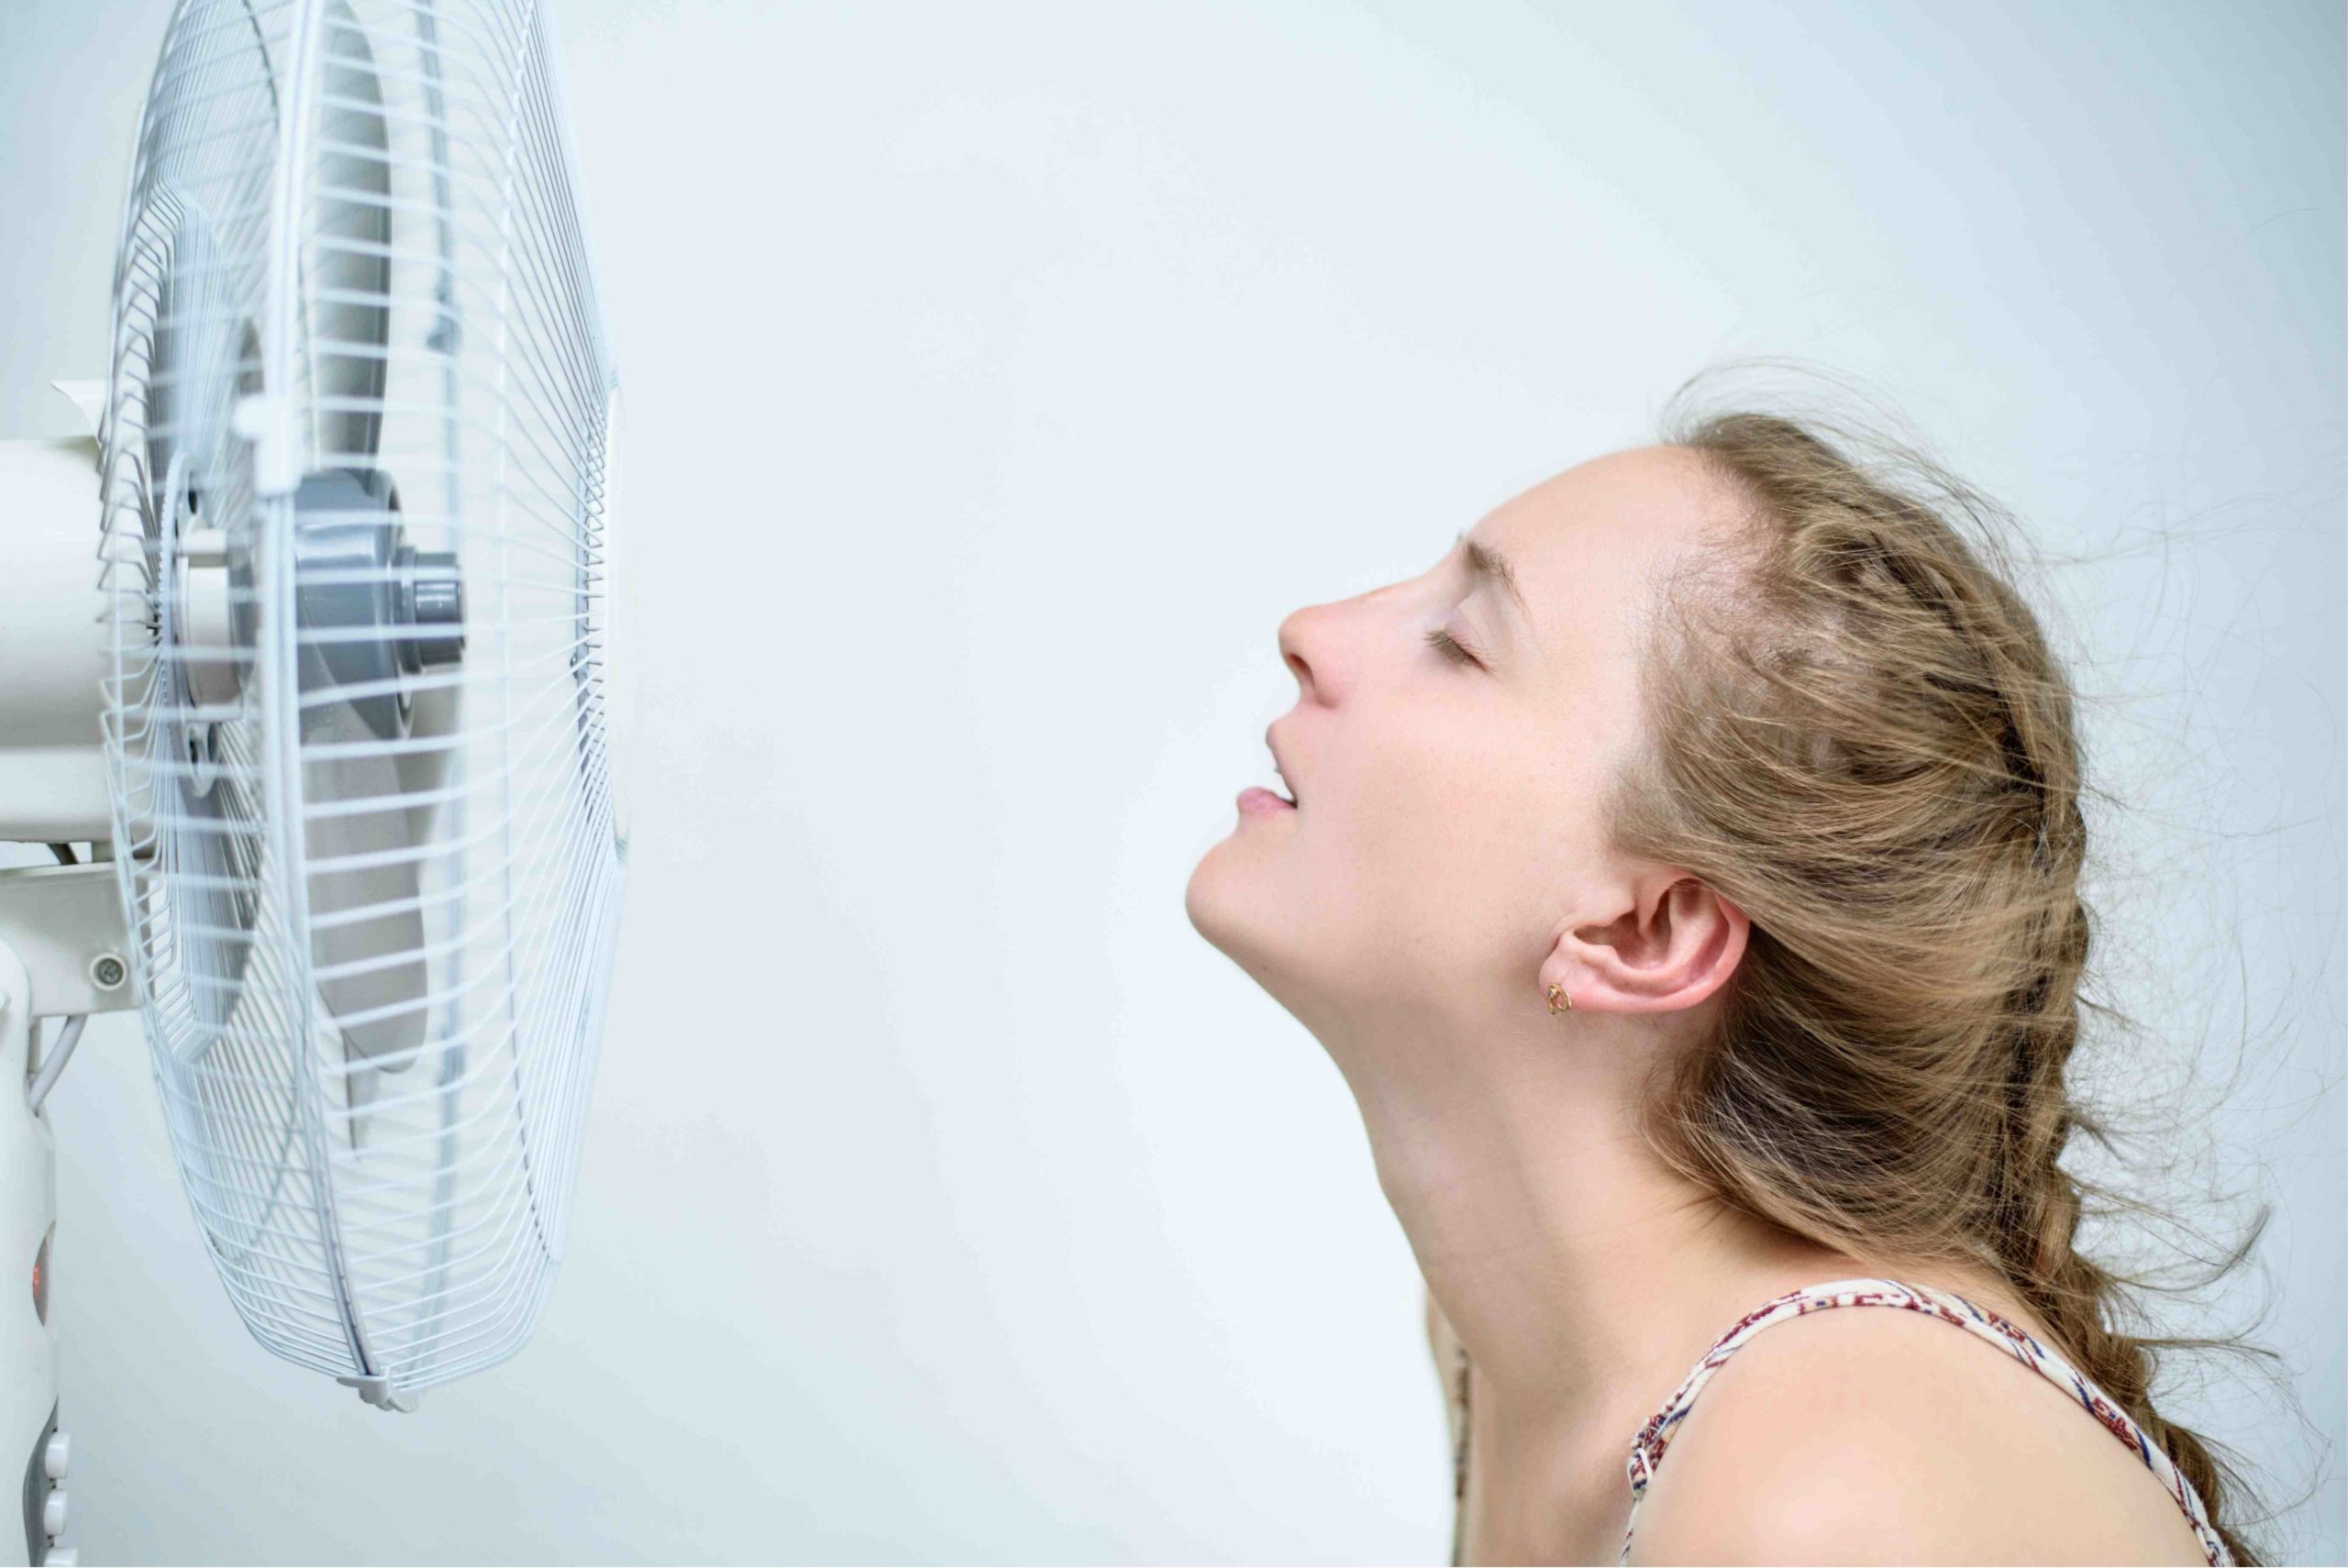 Fan blowing air at a Woman